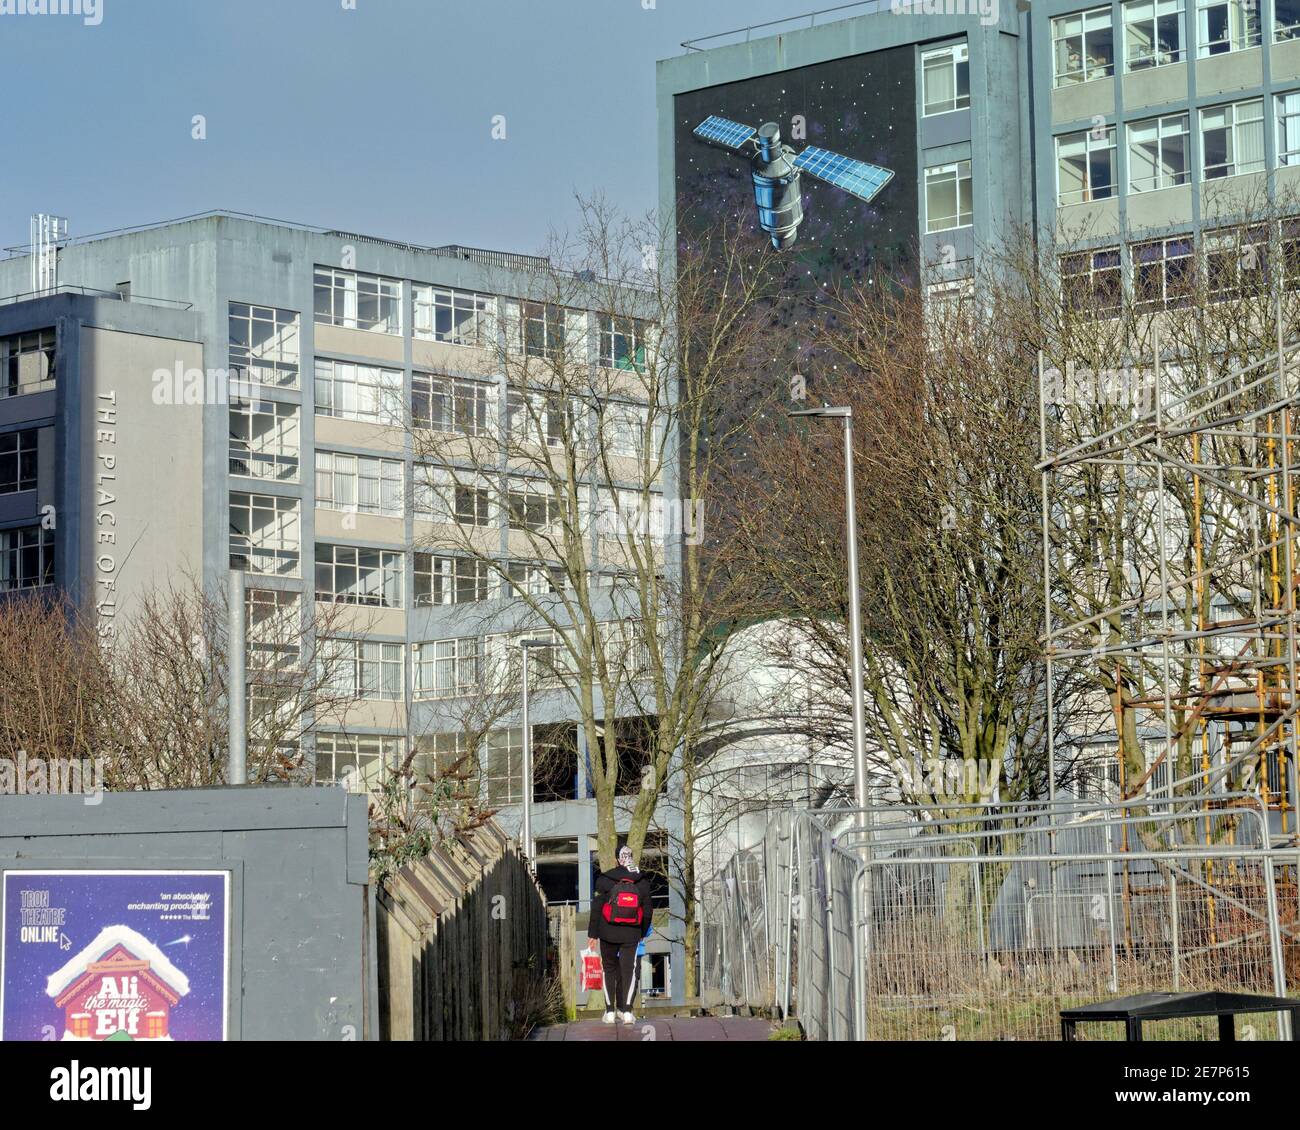 Glasgow, Scotland, UK.30th January, 2021, Lockdown Saturday  sunny outside the strathclyde university science block with its observatory and satellite mural.  misery continues at least the rain stopped as  deserted streets in the town centre shopping areas relies in posters and wall art as a substitute for life. Credit Gerard Ferry/Alamy Live News Stock Photo